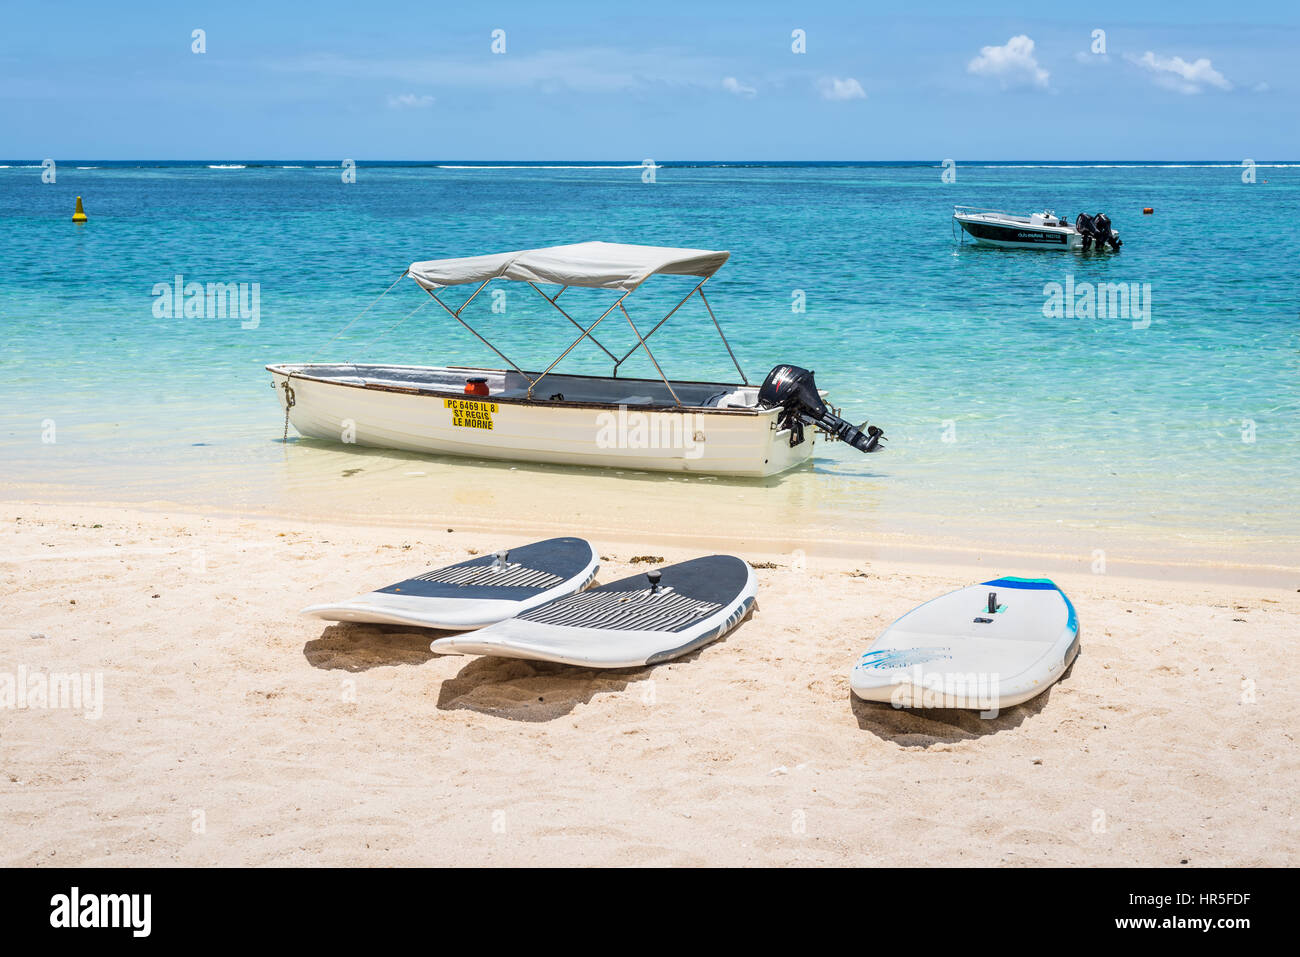 Le Morne, Mauritius - December 7, 2015: Windsurfing boards and boats on the Le Morne Beach, one of the finest beaches in Mauritius and the site of man Stock Photo